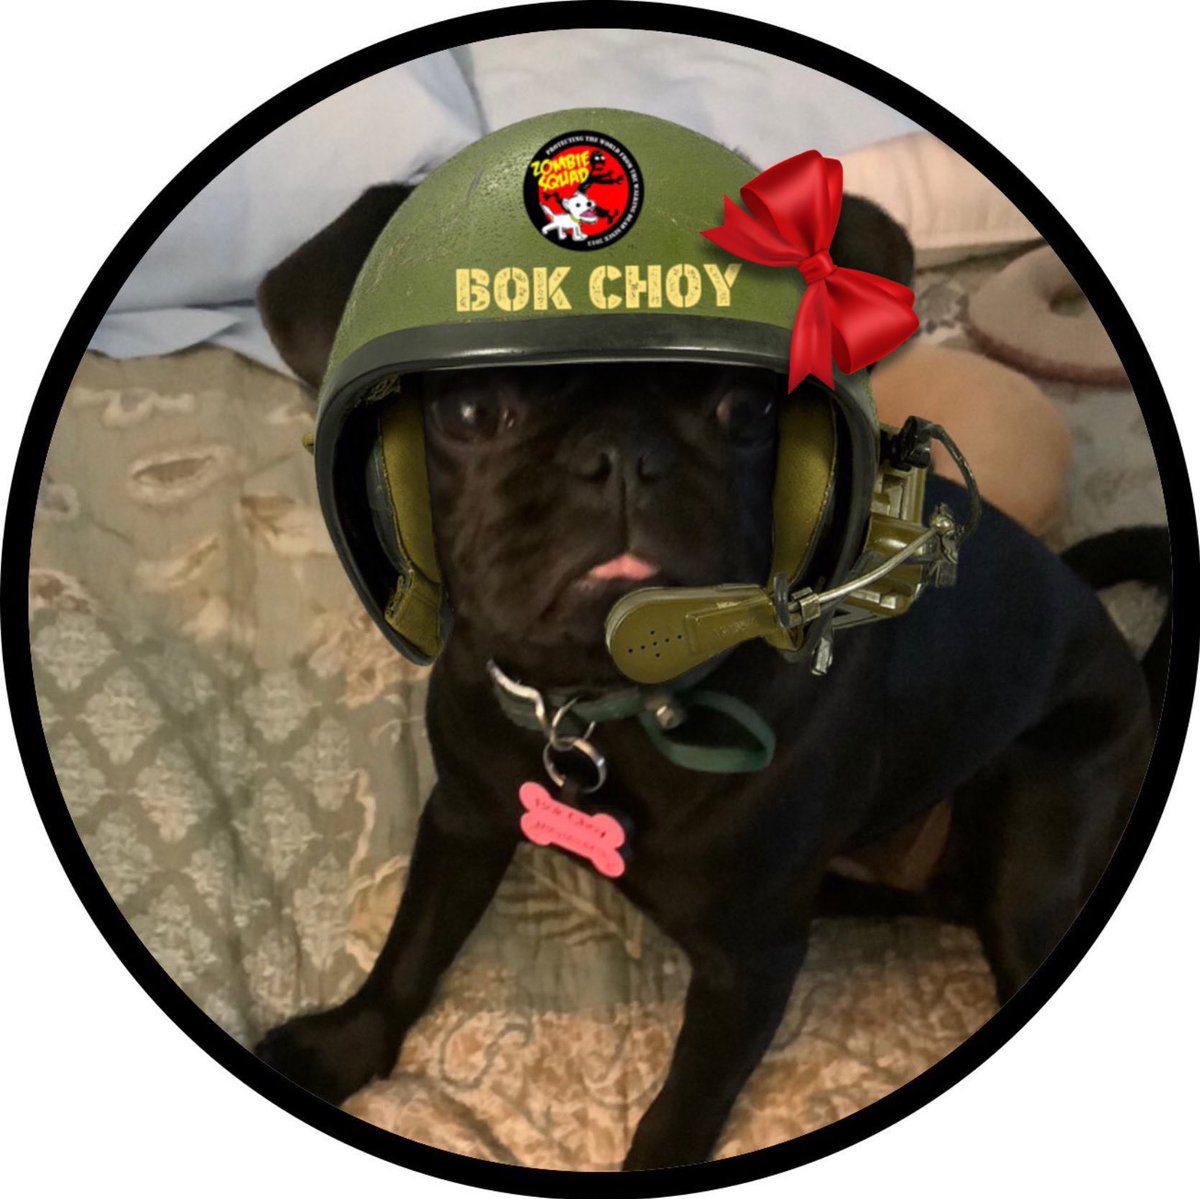 #ZSHQ #puglife @PugnatiousG today me pawtrol in honor of my friend Puggie who #OTRB🌈 Puggie and family welcomed me, mom , Lily and angel Samantha when we started. Me salute you fren. Me will miss you! 💔All safe frens me still fierce. Pug glitter left. RAAAaaa